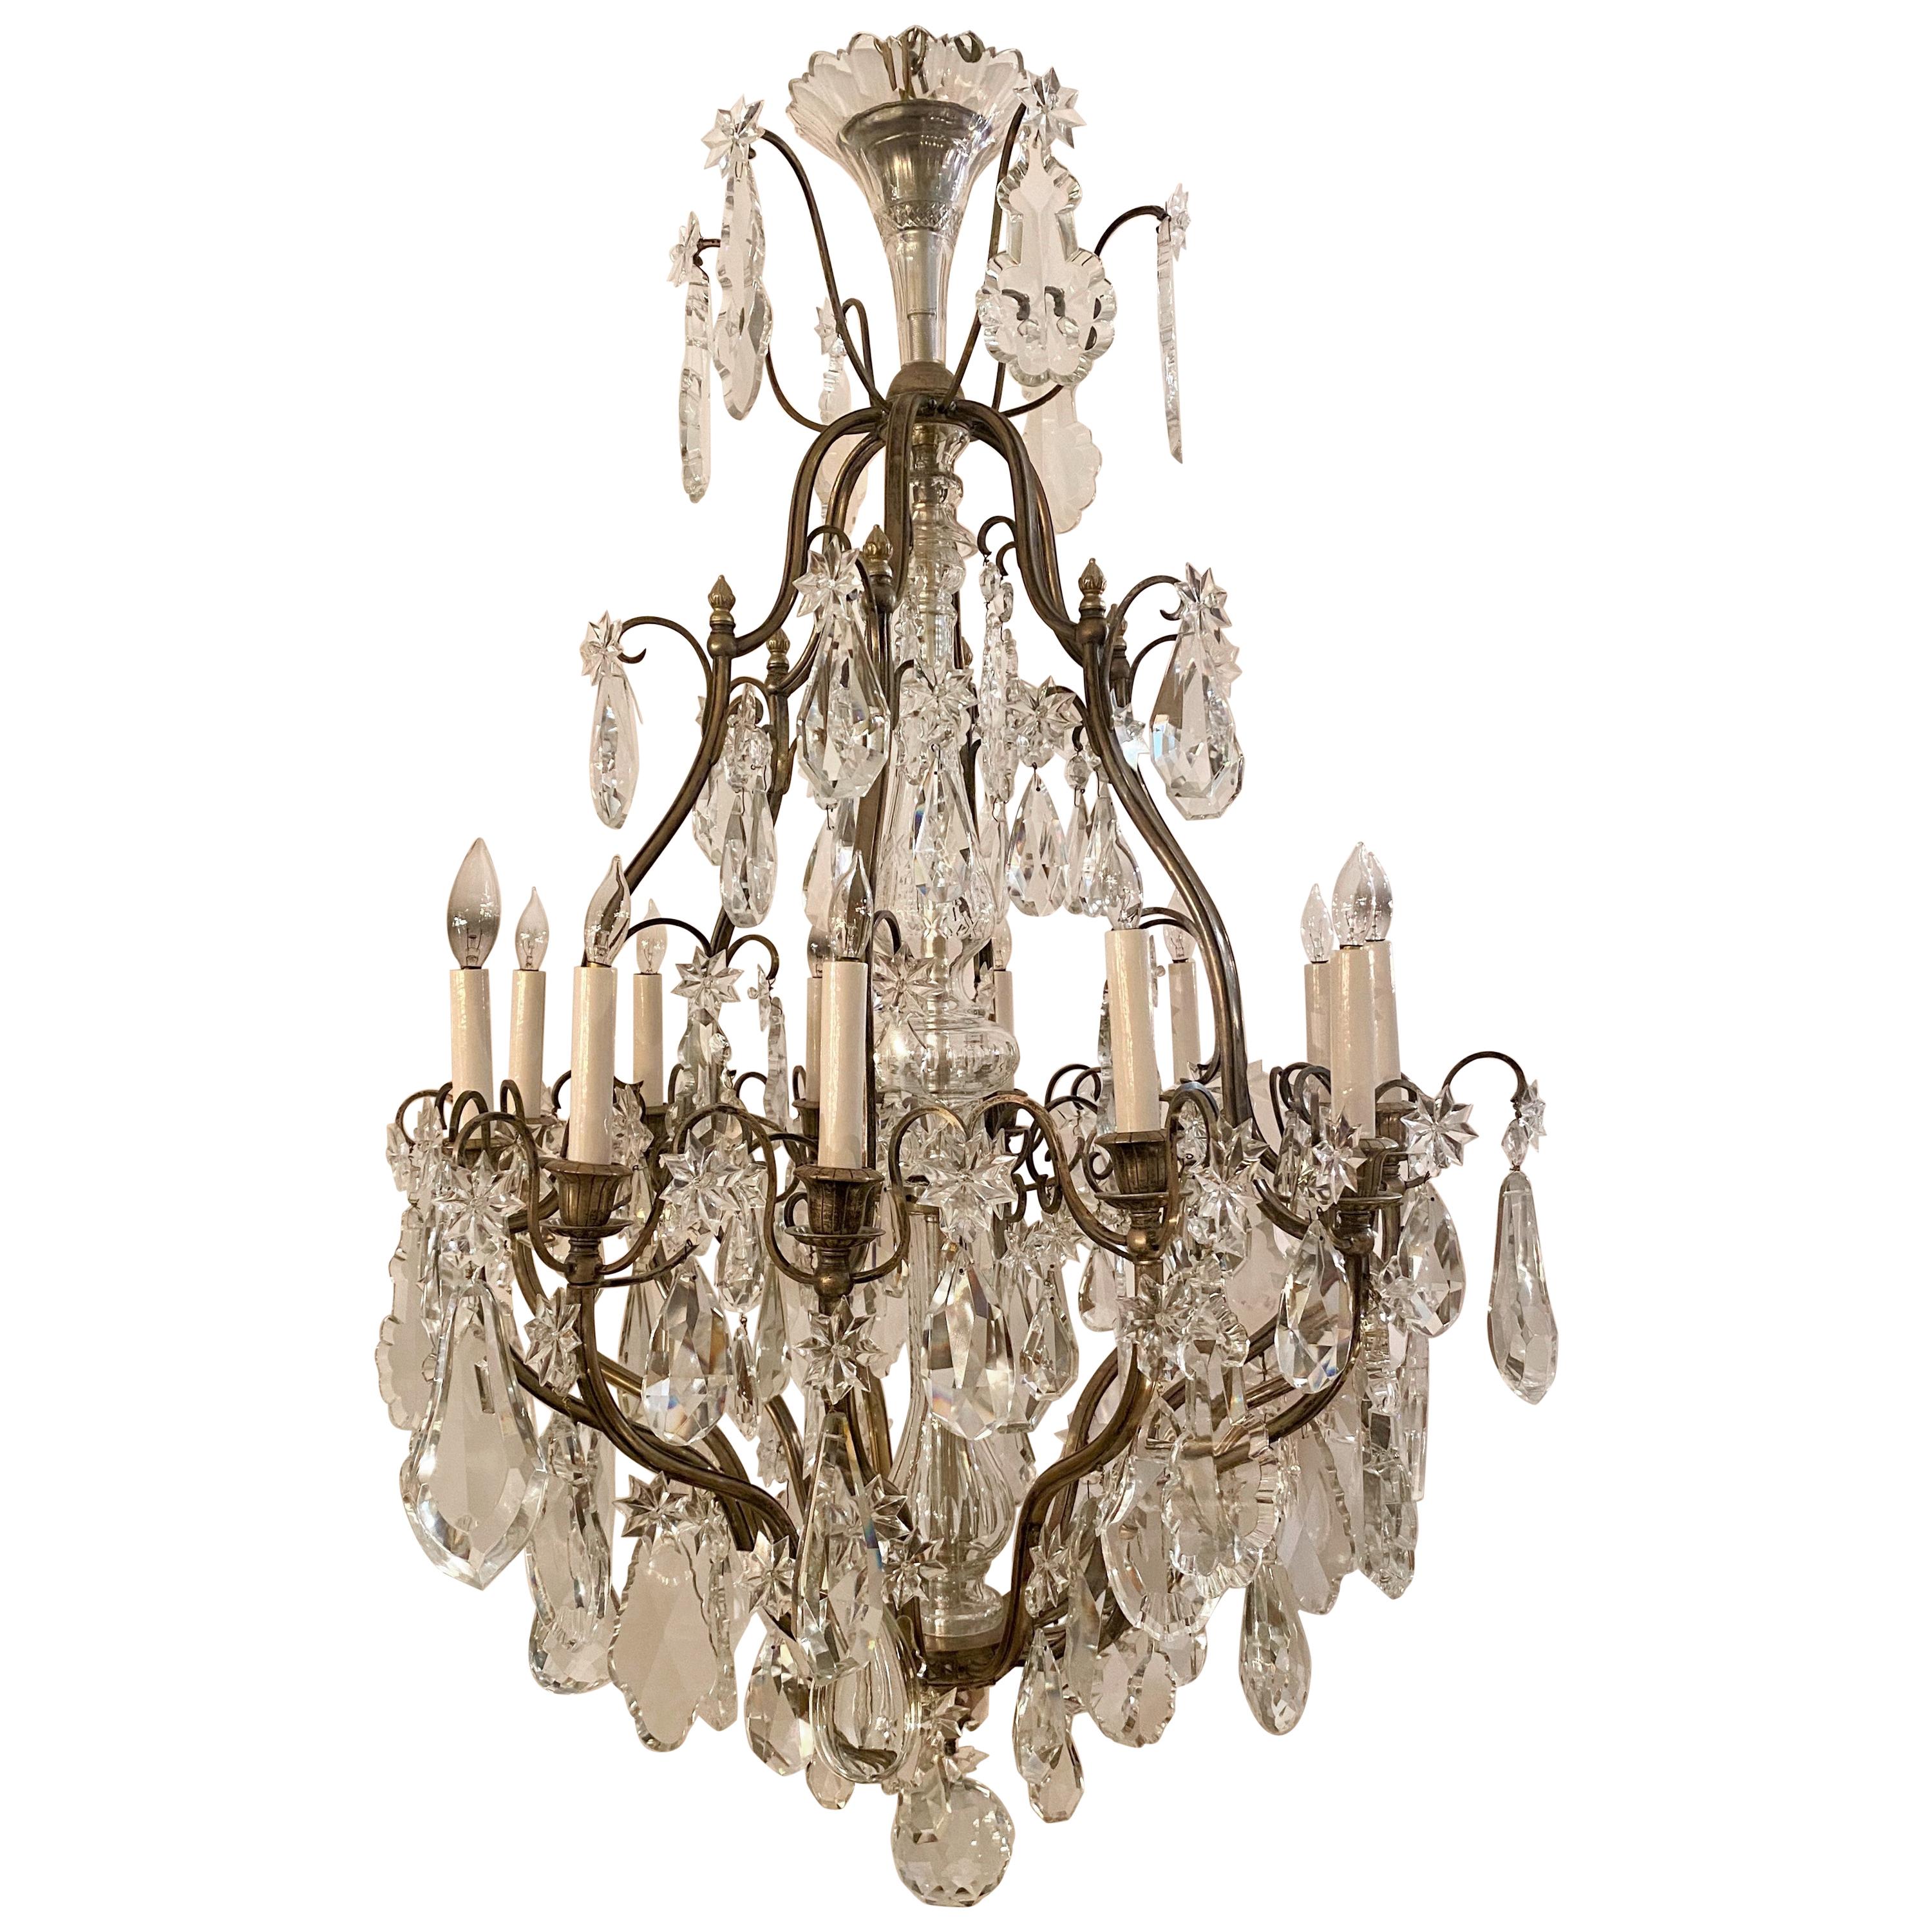 Antique French Belle Epoche Crystal and Silvered Bronze Chandelier, circa 1890s For Sale